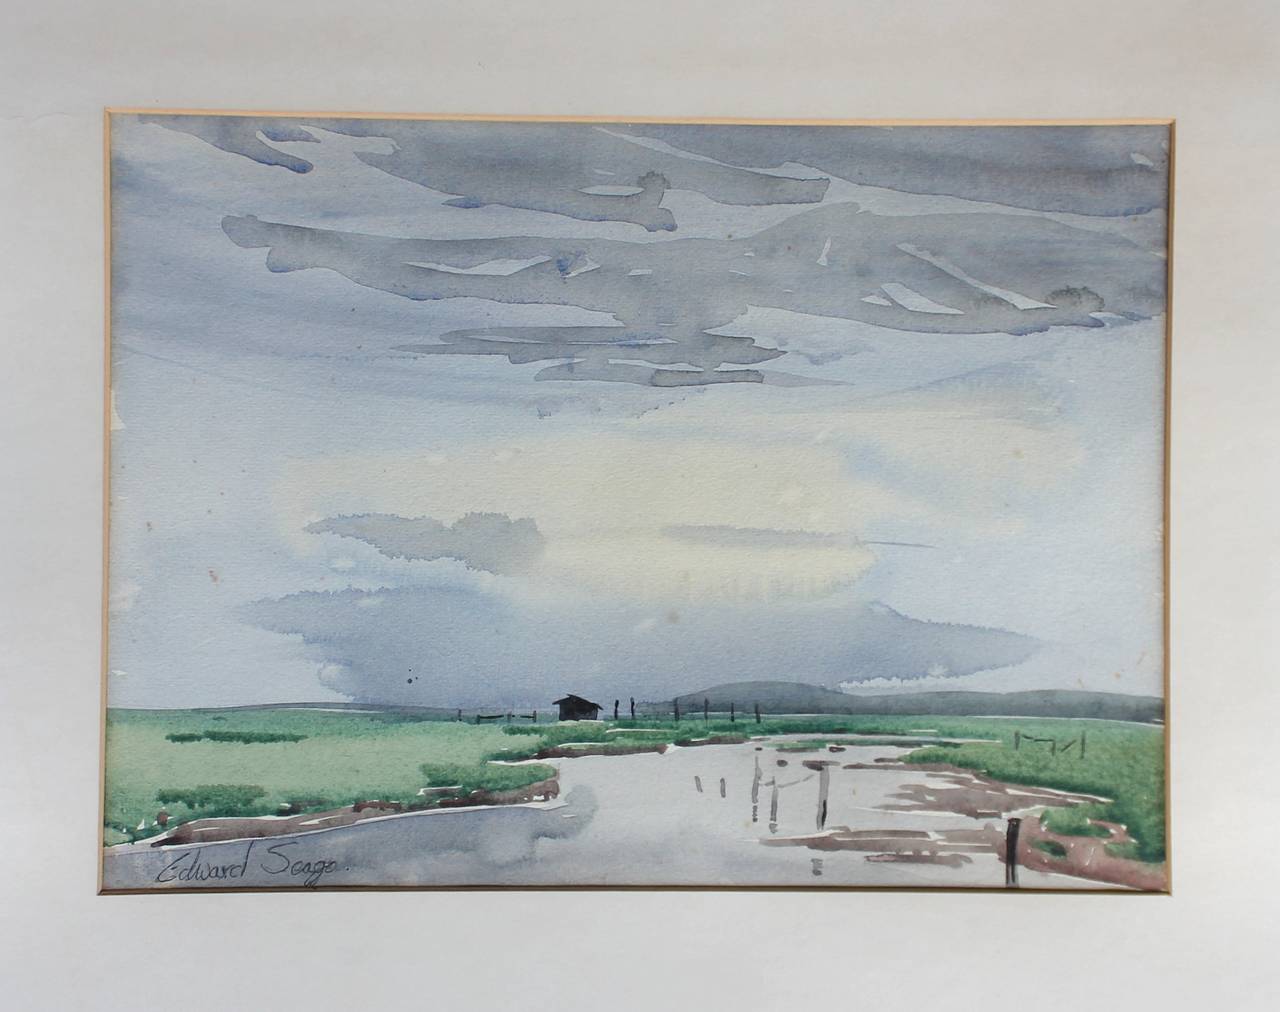 A watercolor by Edward Seago RWS, RBA, (1910-1974).

Signed lower left and in its original painted frame. When taking it out of the frame, it has the recipients details in pencil on the reverse of the paper.

Measures: 37 cm wide x 27 cm high